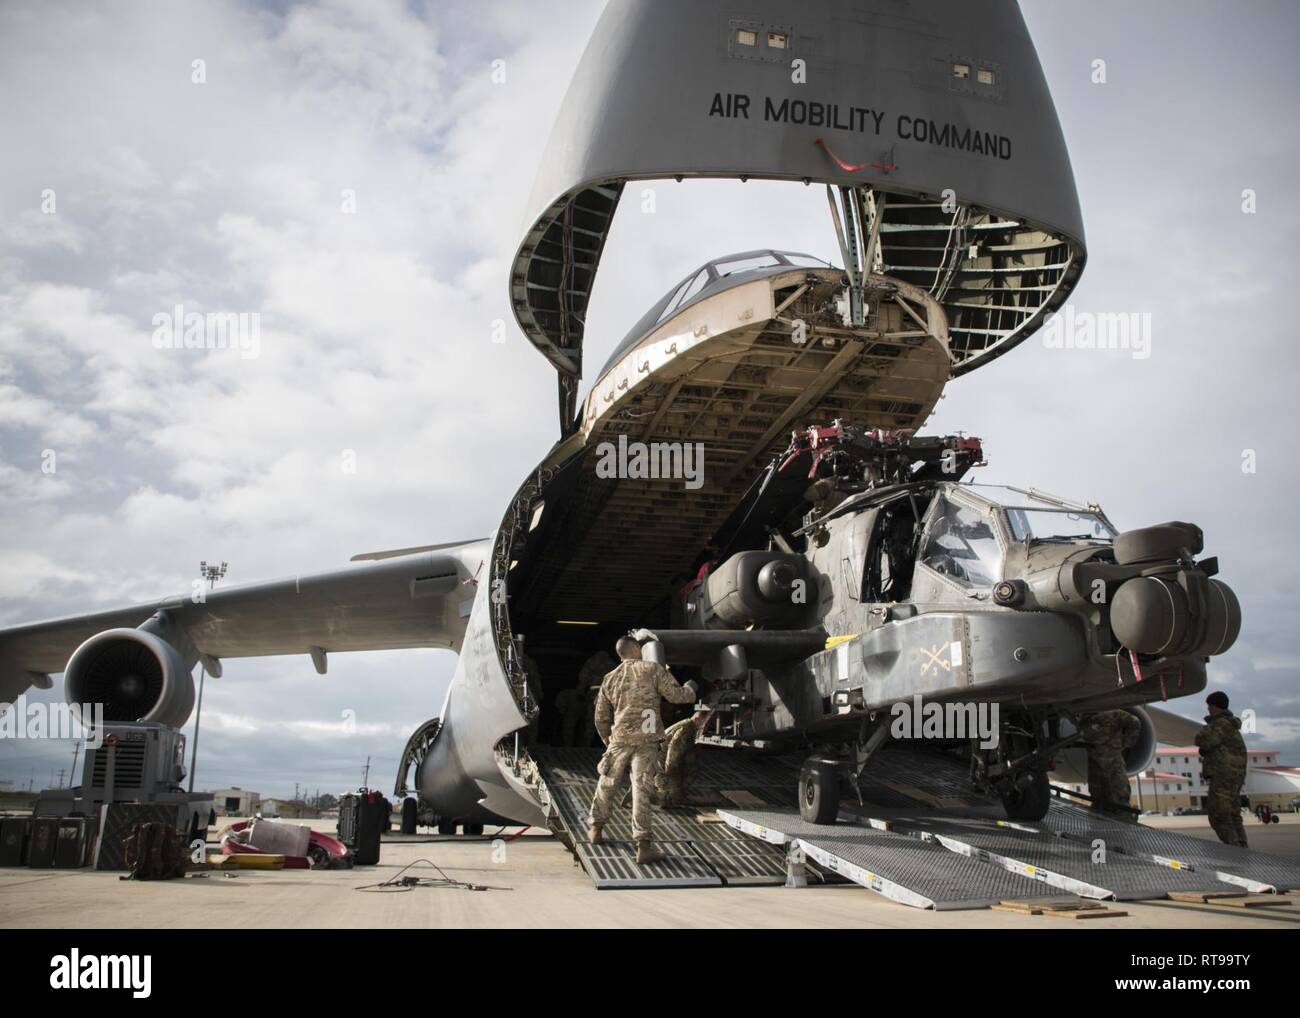 NAVAL STATION ROTA, Spain (January 30, 2019) Soldiers assigned to the 1st Armored Division and 1109th Theater Aviation Sustainment Maintenance Group load an AH-60 Apache helicopter onto a C-5 aircraft during Intermodal operations. Intermodal operations combine sea and air transportation to reduce cargo handling, improve security, minimize damage and allow quicker transportation. Stock Photo